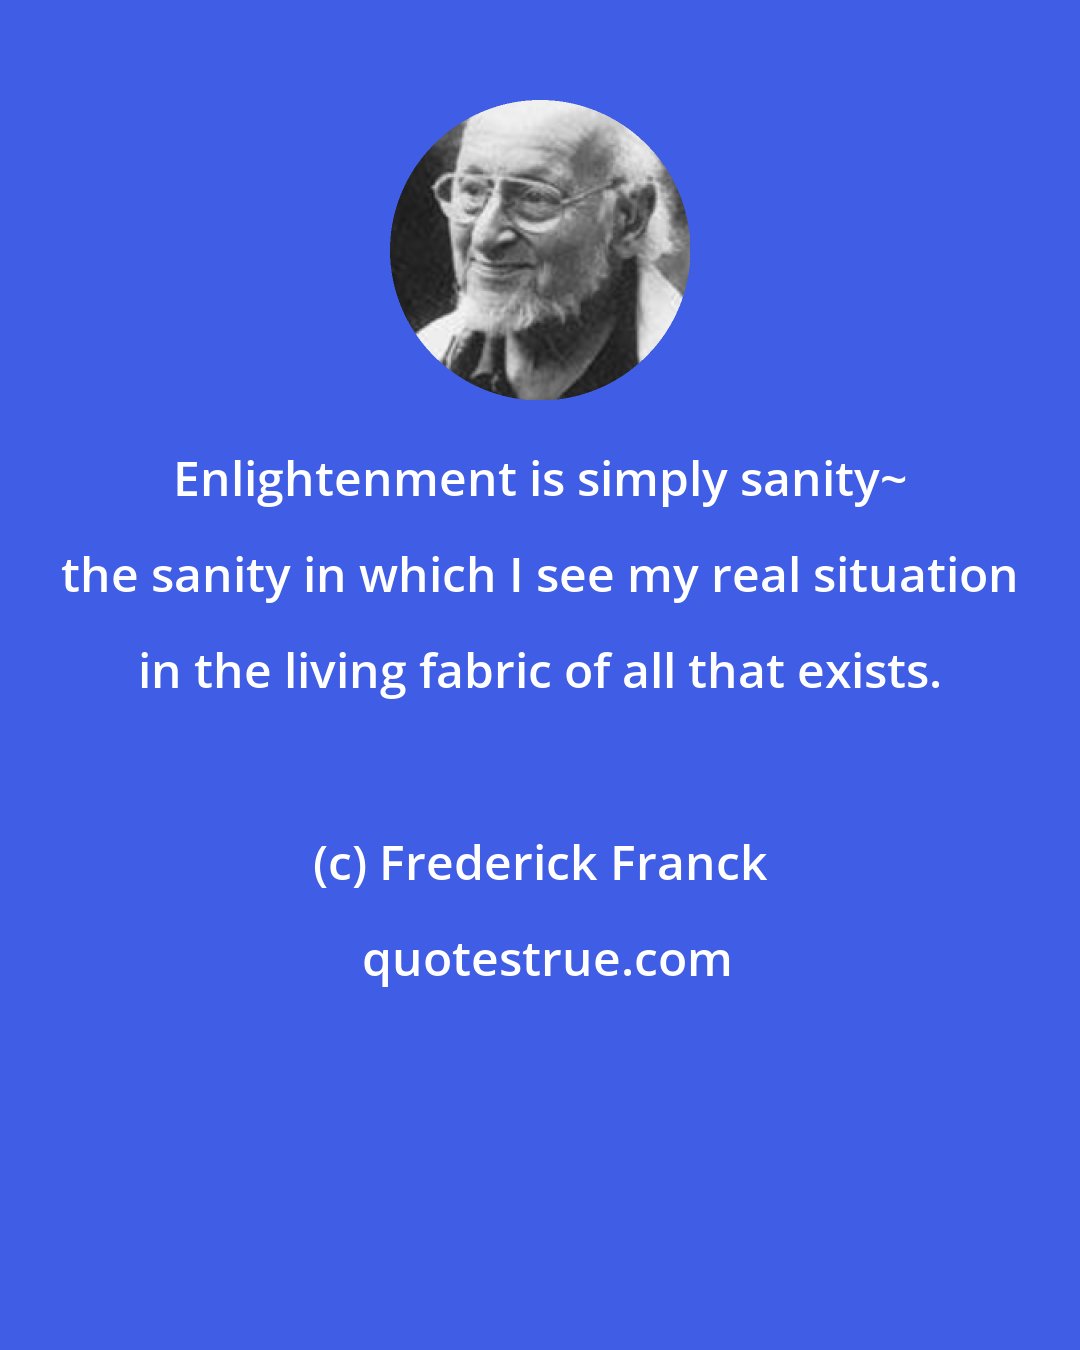 Frederick Franck: Enlightenment is simply sanity~ the sanity in which I see my real situation in the living fabric of all that exists.